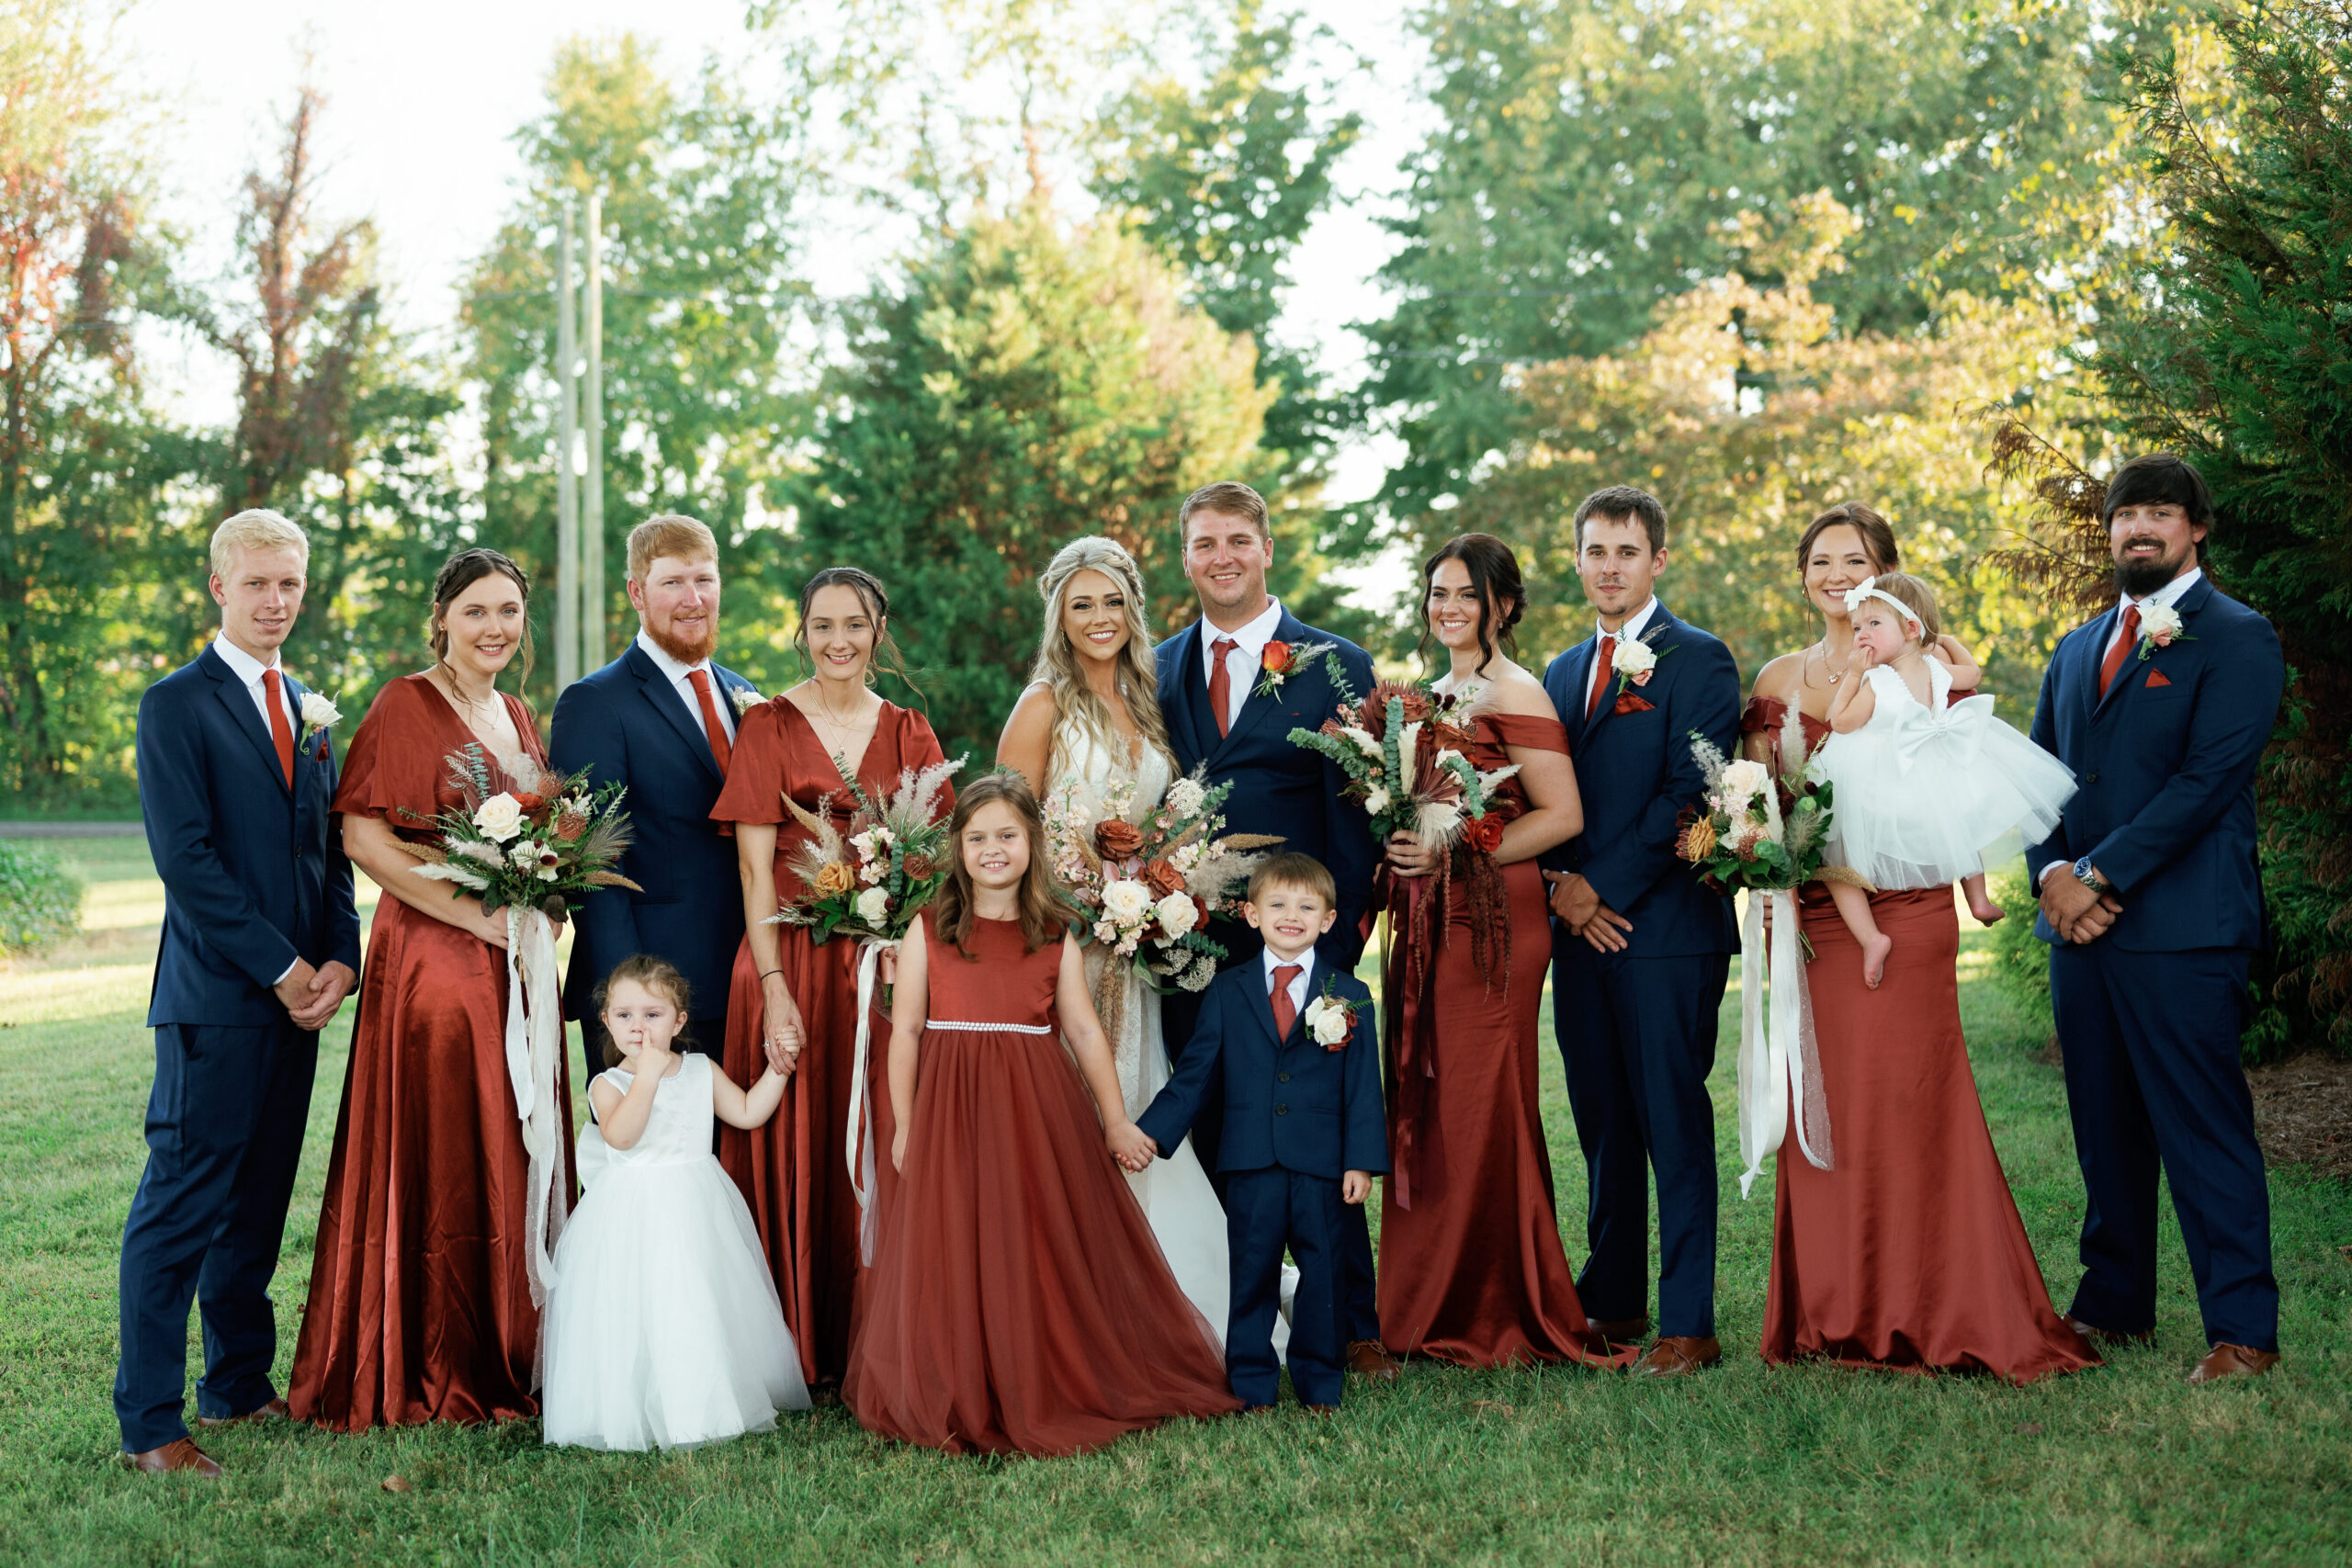 Bride and groom with family.